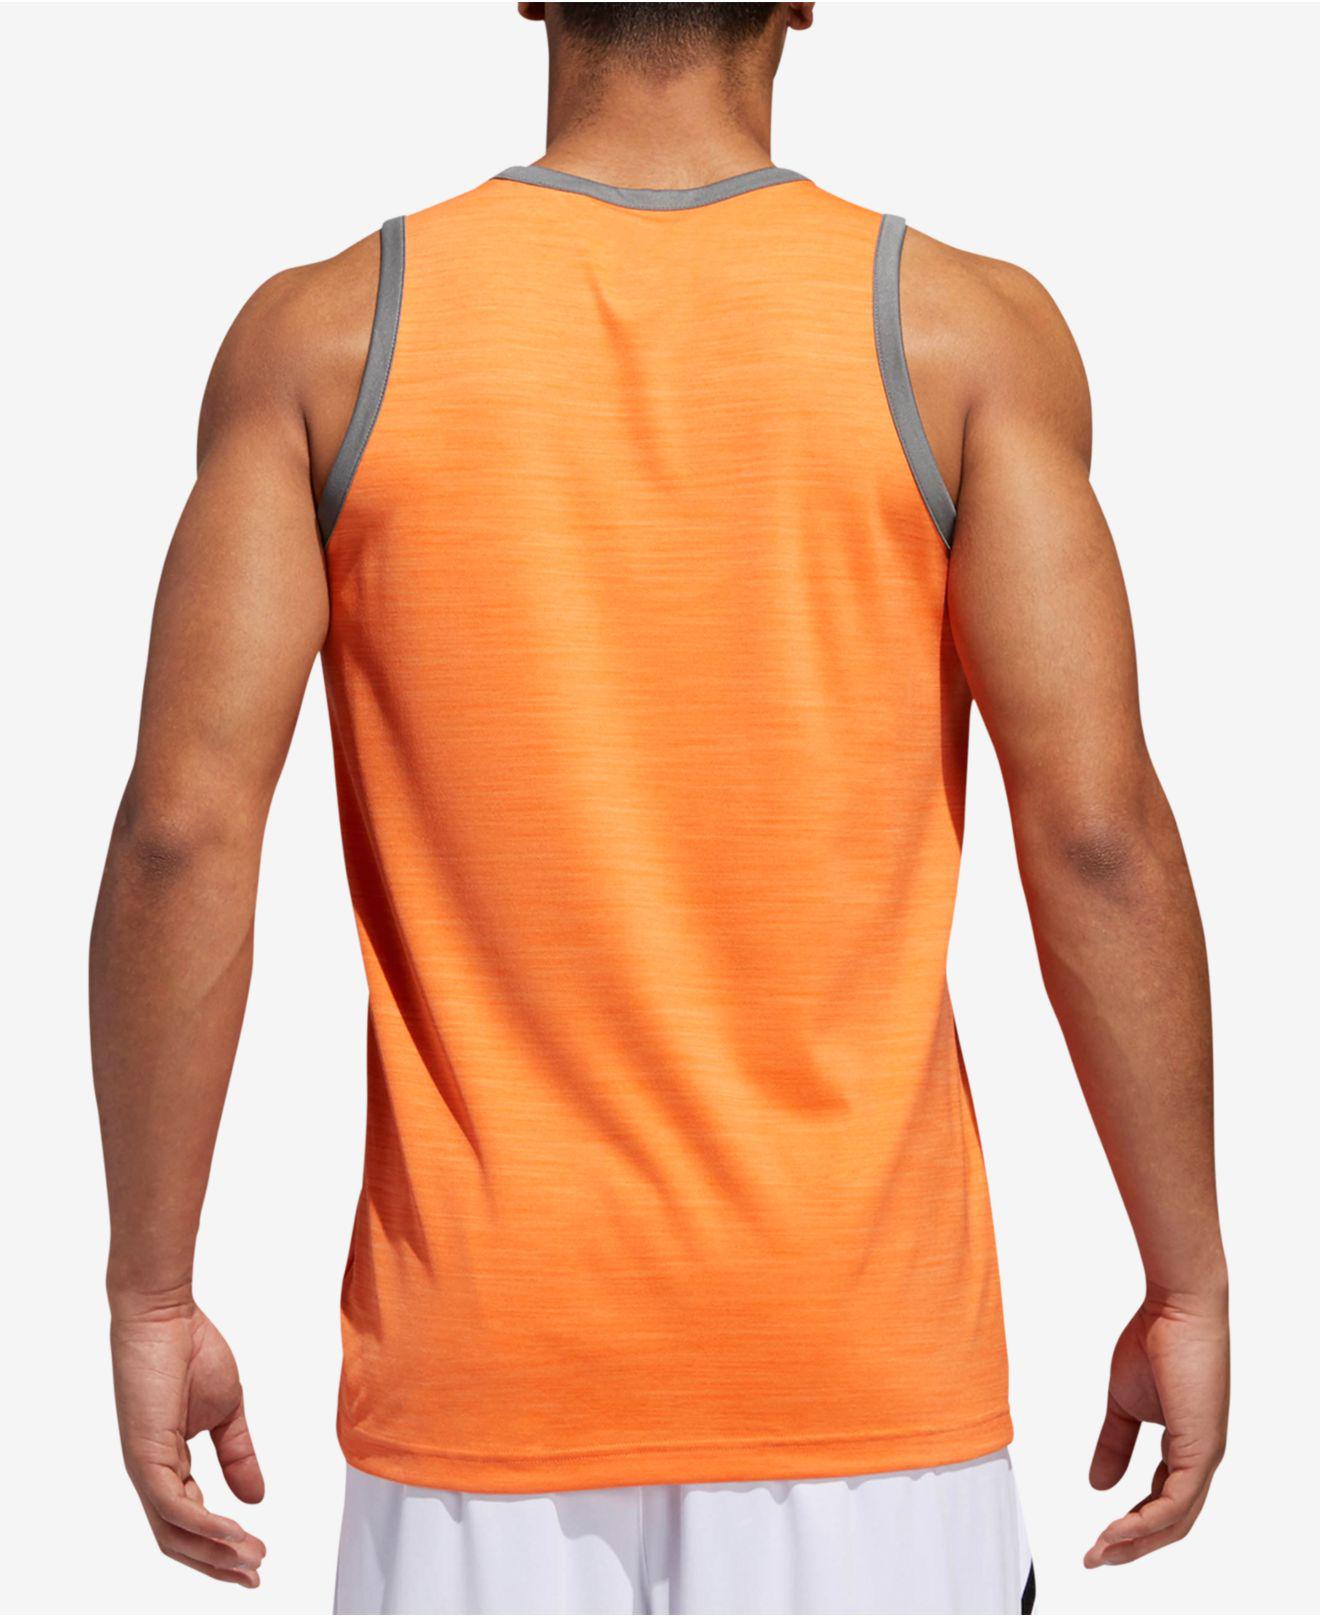 adidas Synthetic 3g Tank Top in Orange for Men - Lyst